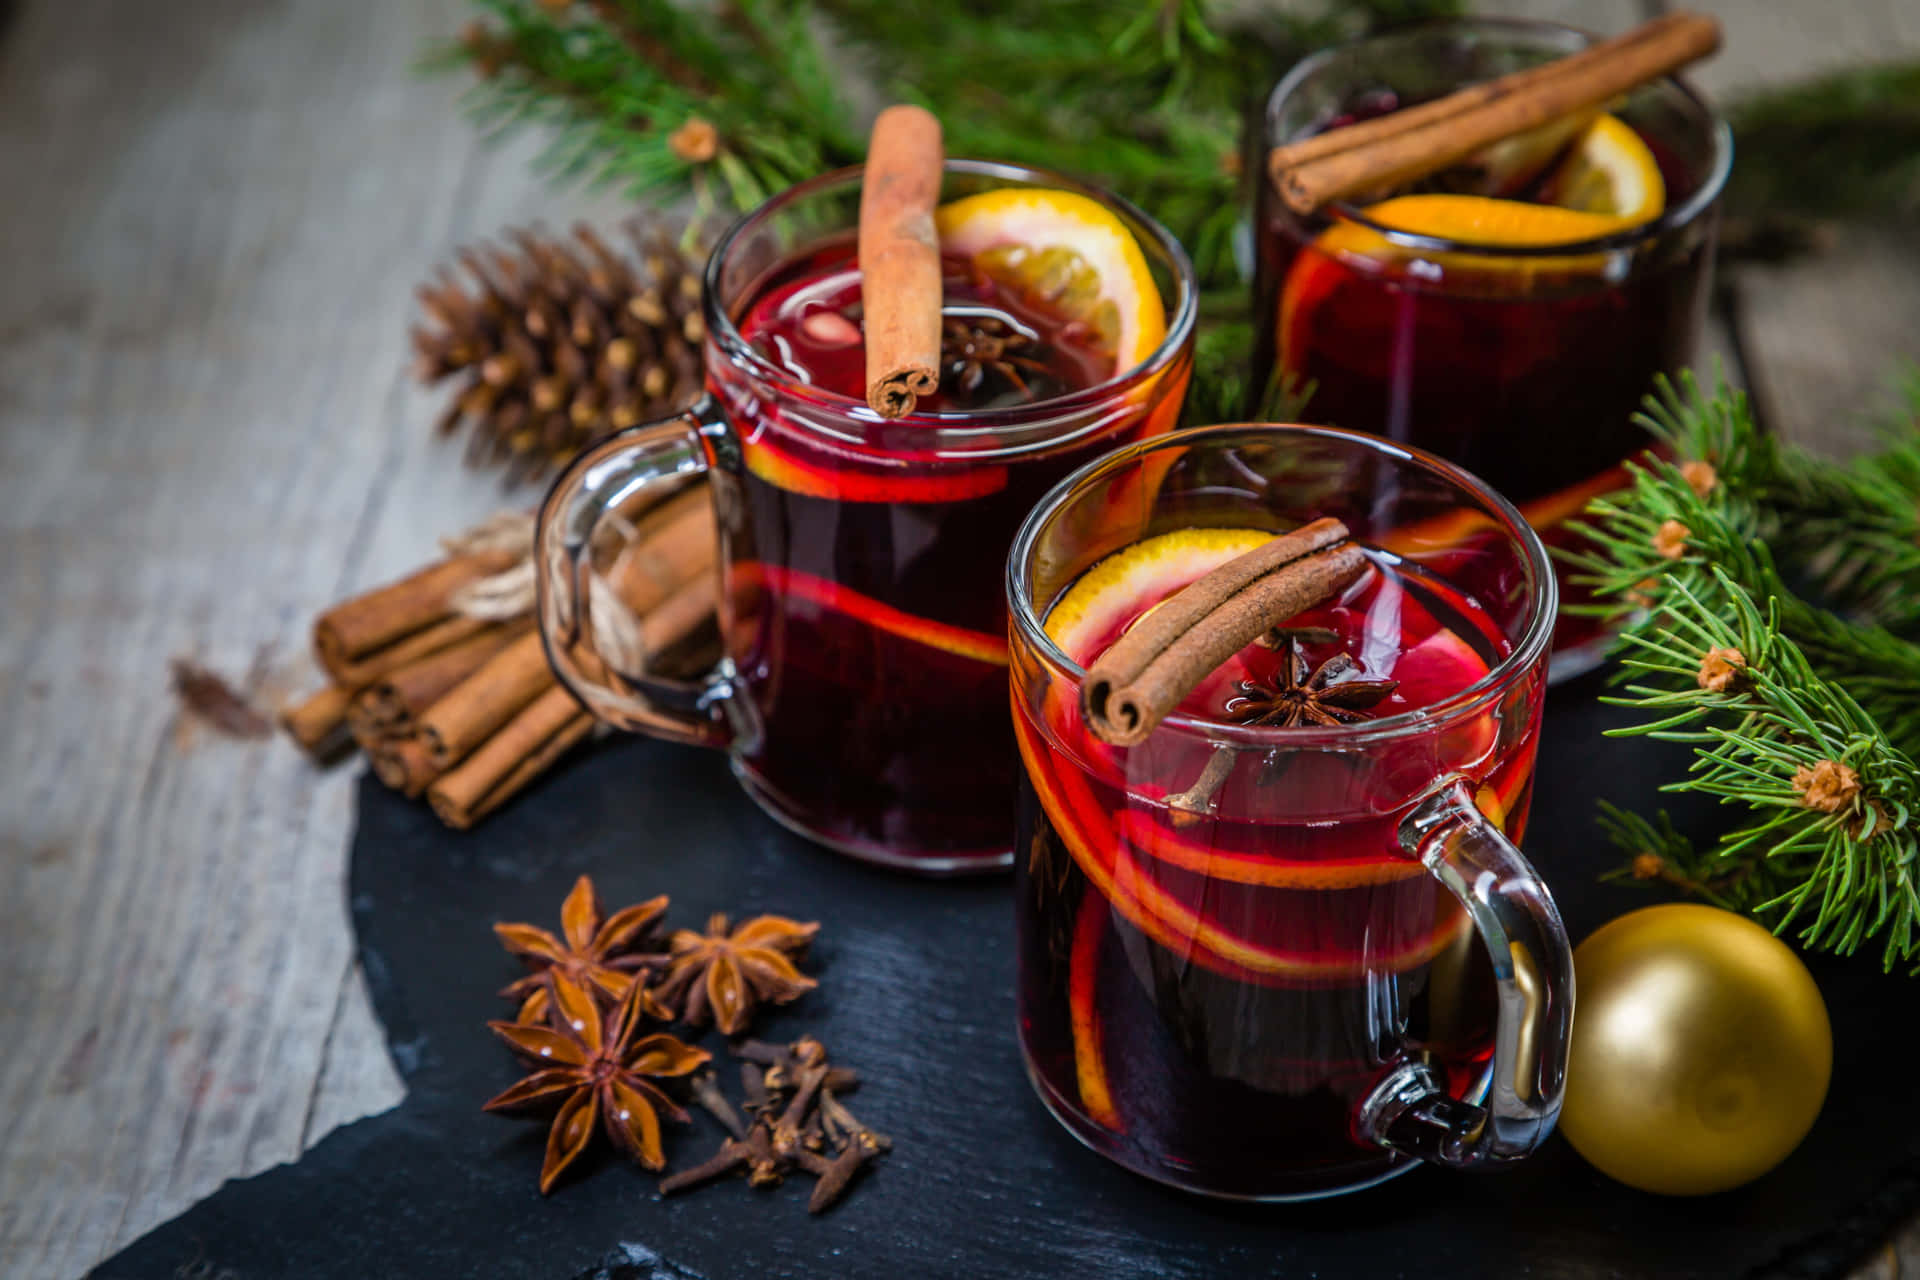 Delicious Mulled Wine with Winter Spices and Citrus Fruits in a Cozy Atmosphere Wallpaper